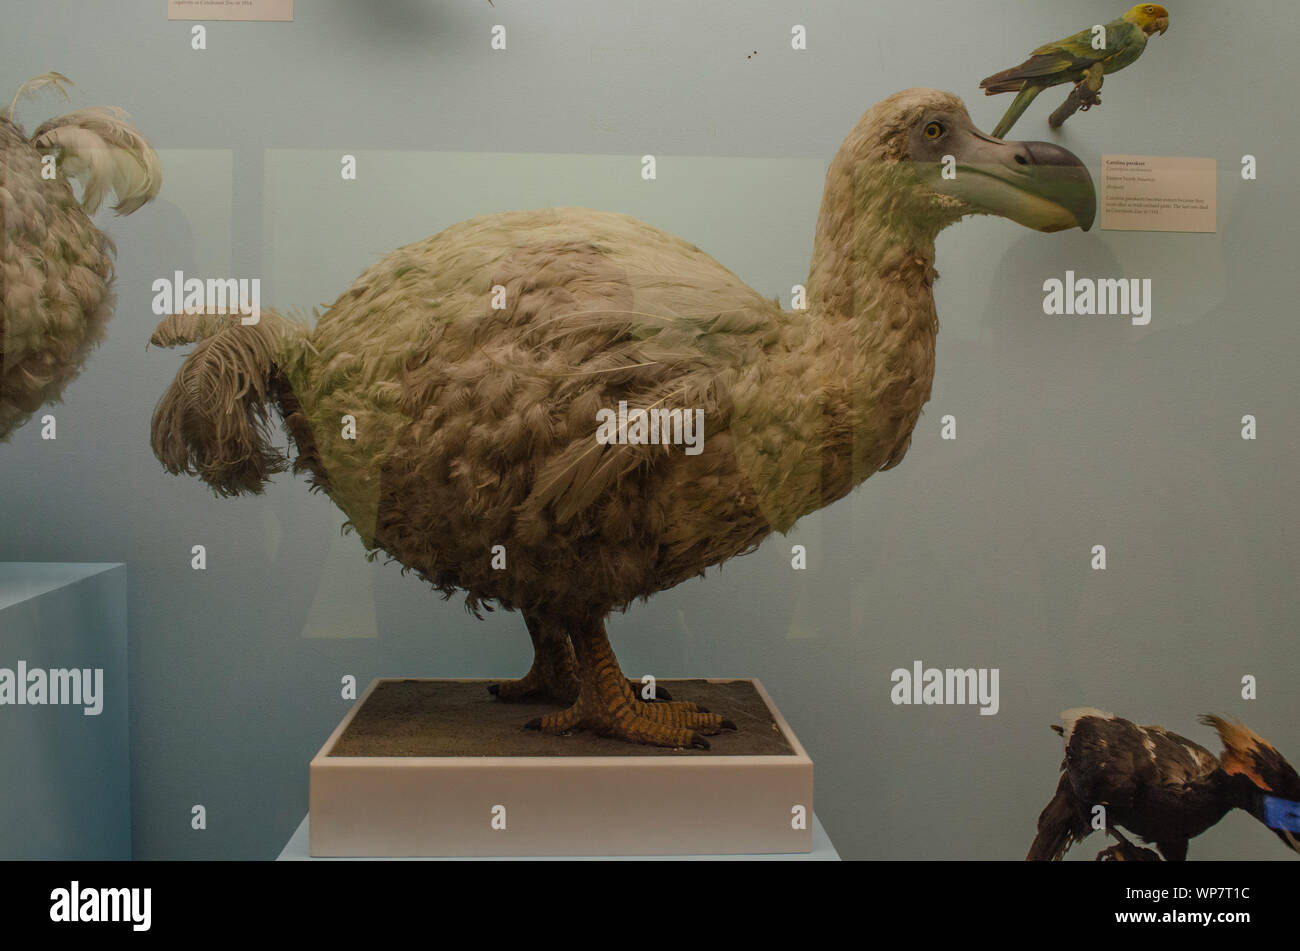 Stuffed Dodo bird on display at the Natural History Museum, London Stock Photo